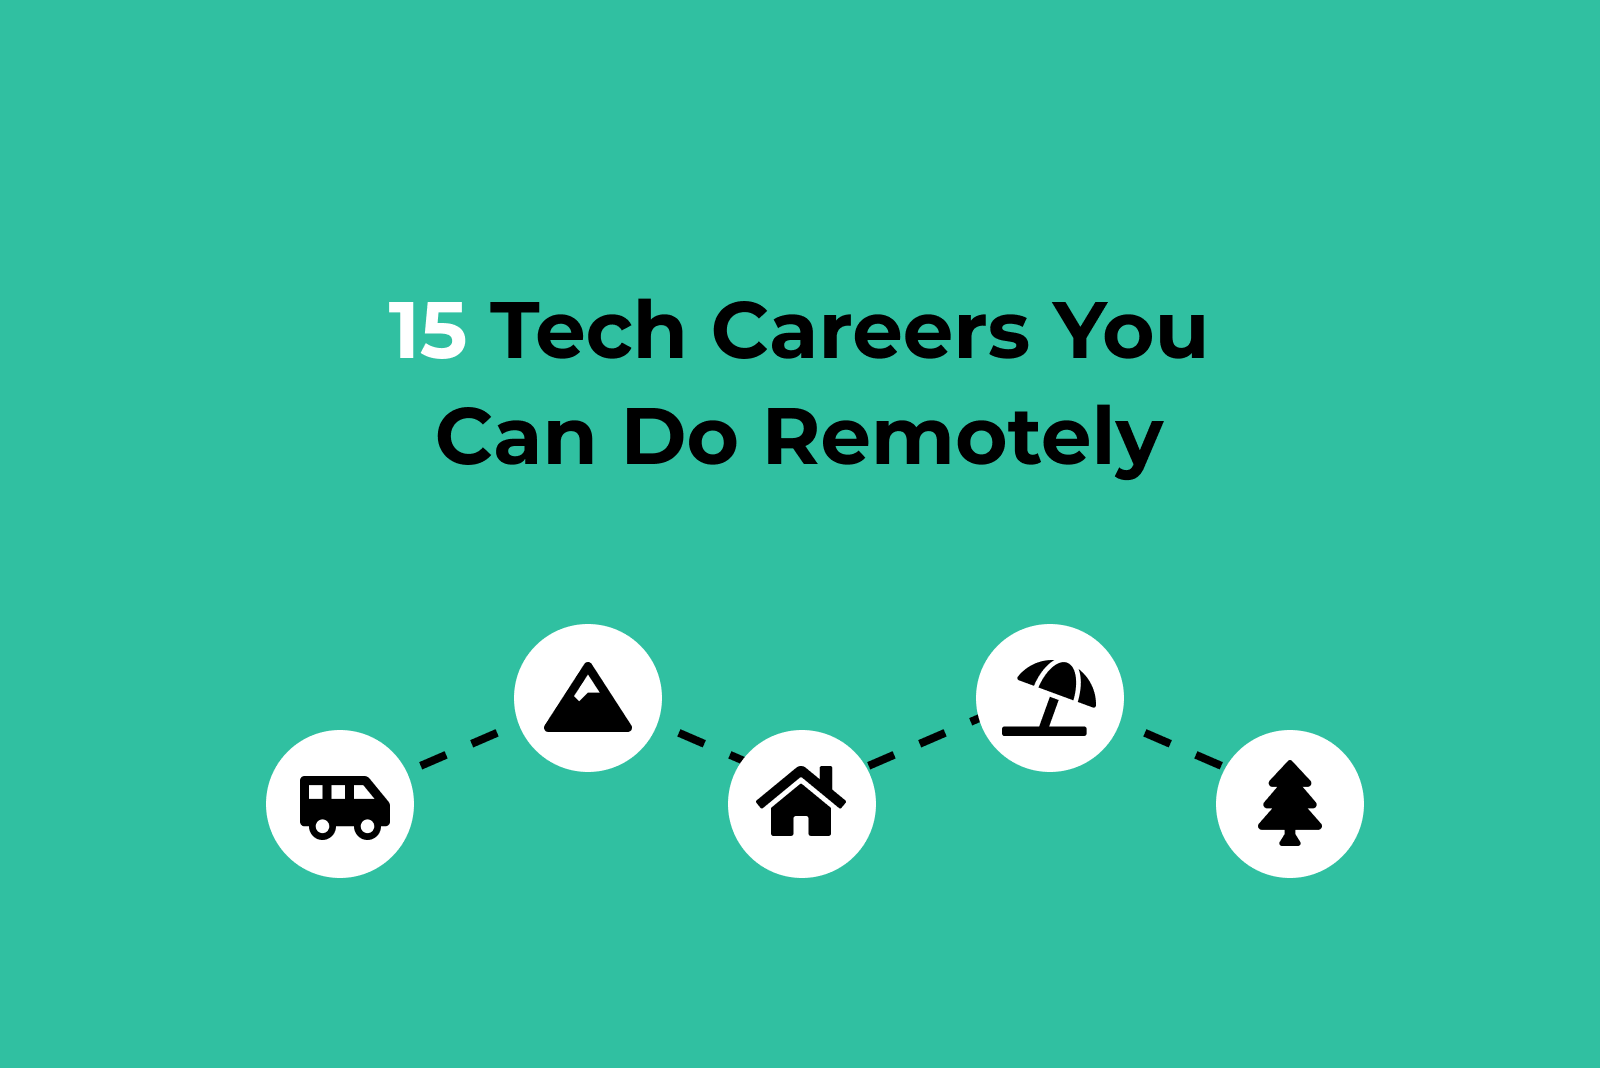 15 Tech Careers You Can Do Remotely